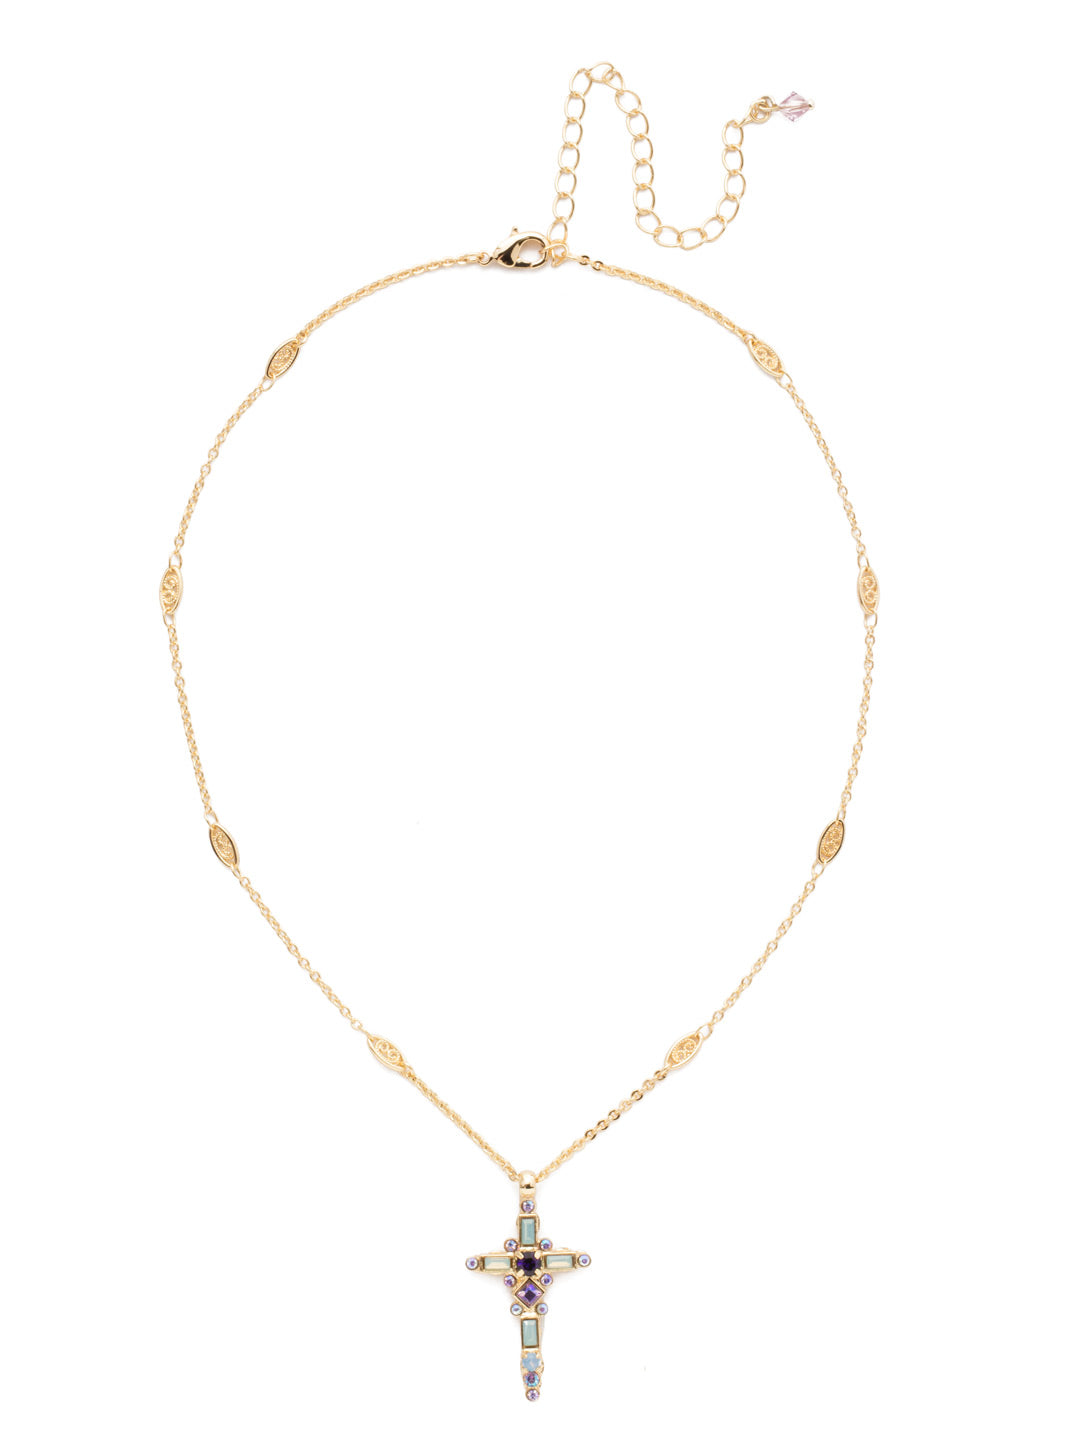 Dierdre Cross Pendant Necklace - NDQ54BGGLN - A truly divine pendant. This delicate cross necklace features multi-cut crystals in an antique inspired setting. This crystal cross necklace offers movement on the chain for ease of wear. From Sorrelli's  Grand Lagoon collection in our Bright Gold-tone finish.